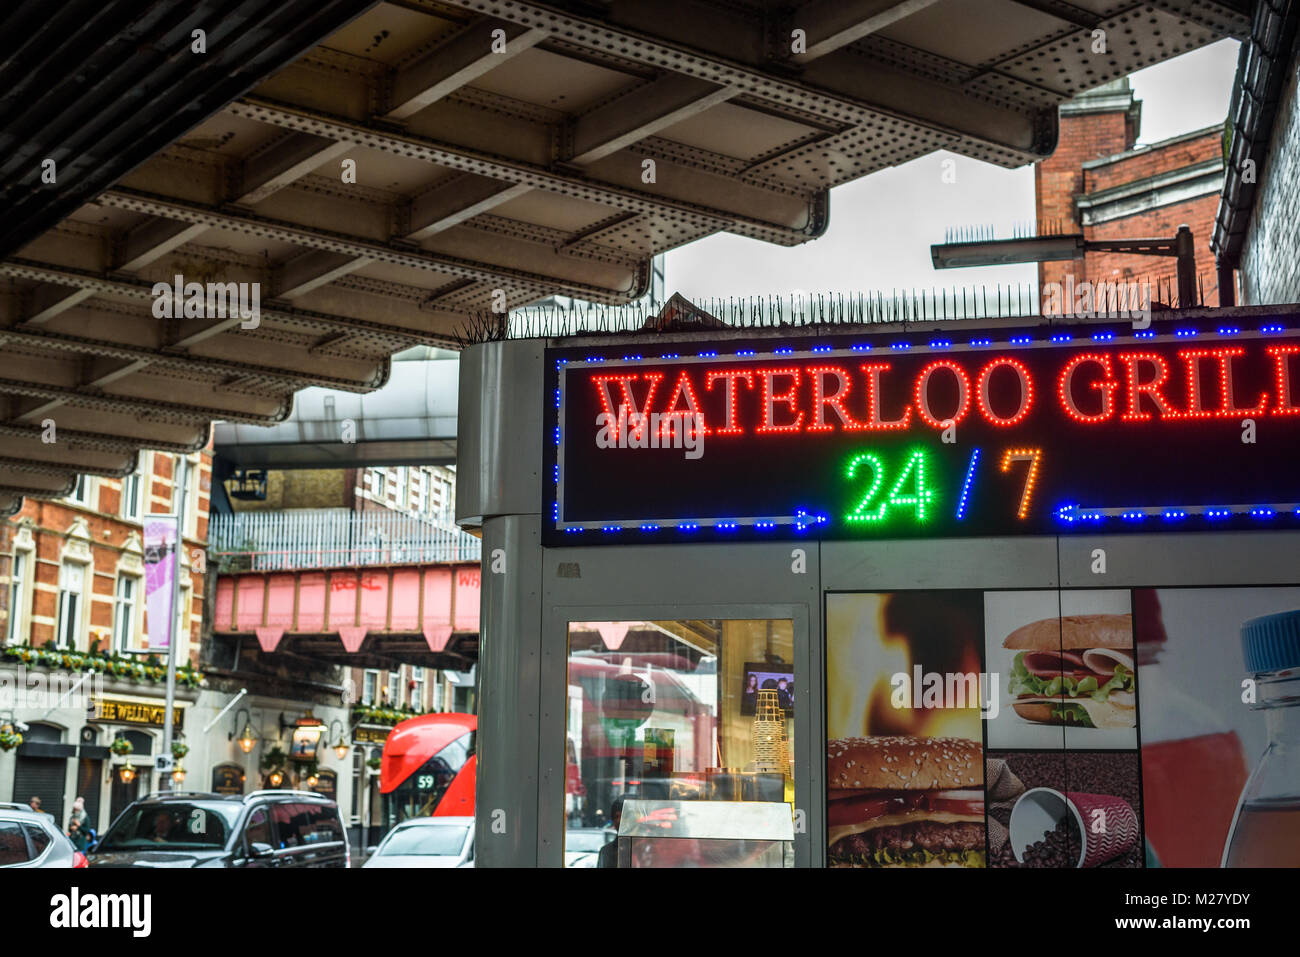 A fast food grill in Waterloo, London, Uk. Stock Photo